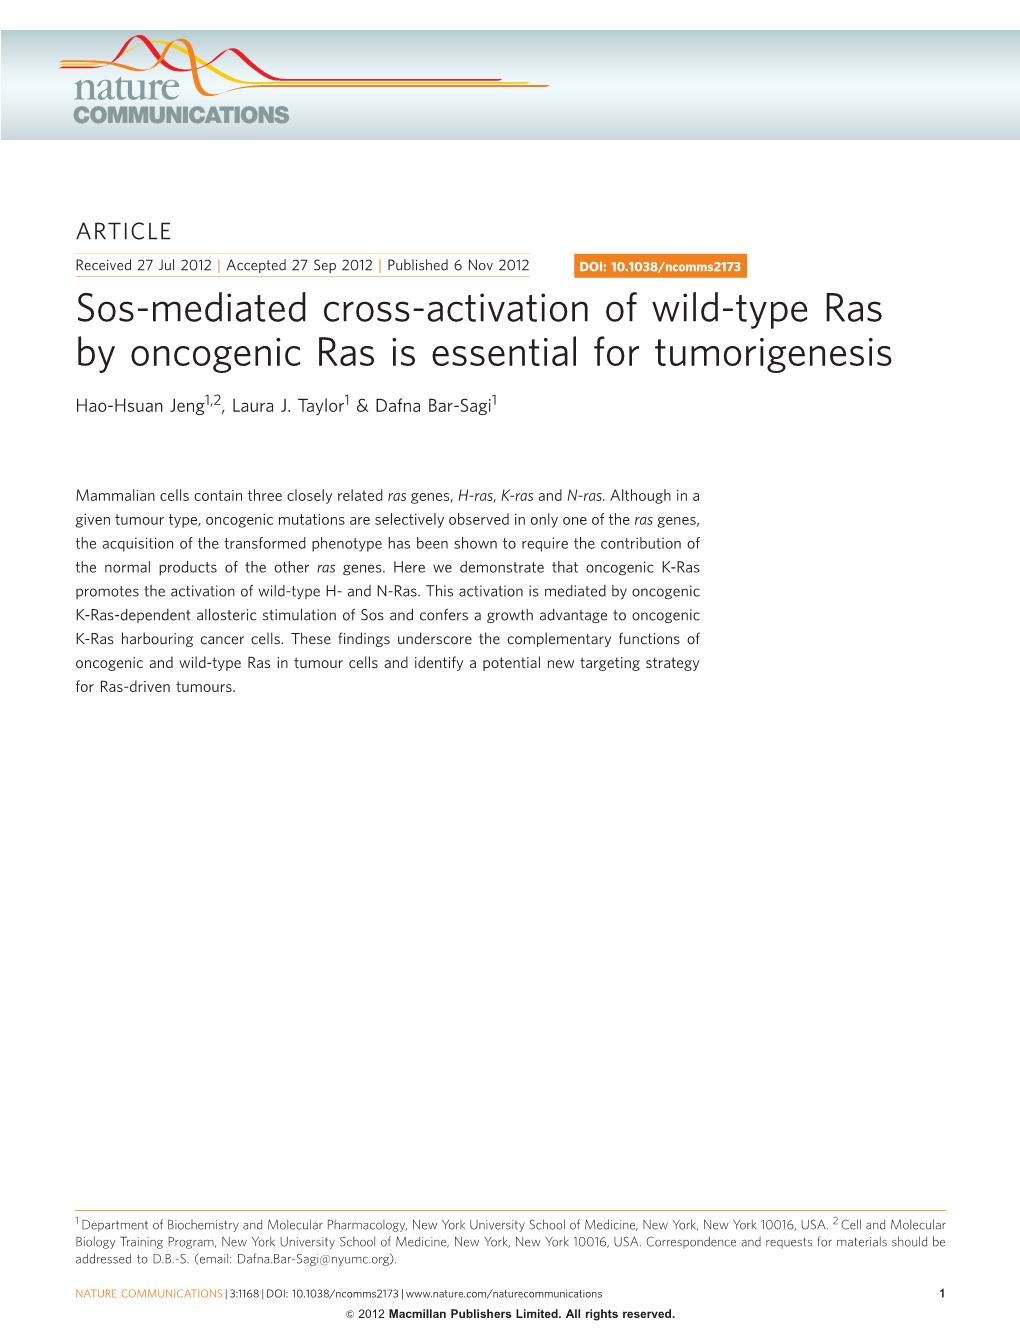 Sos-Mediated Cross-Activation of Wild-Type Ras by Oncogenic Ras Is Essential for Tumorigenesis